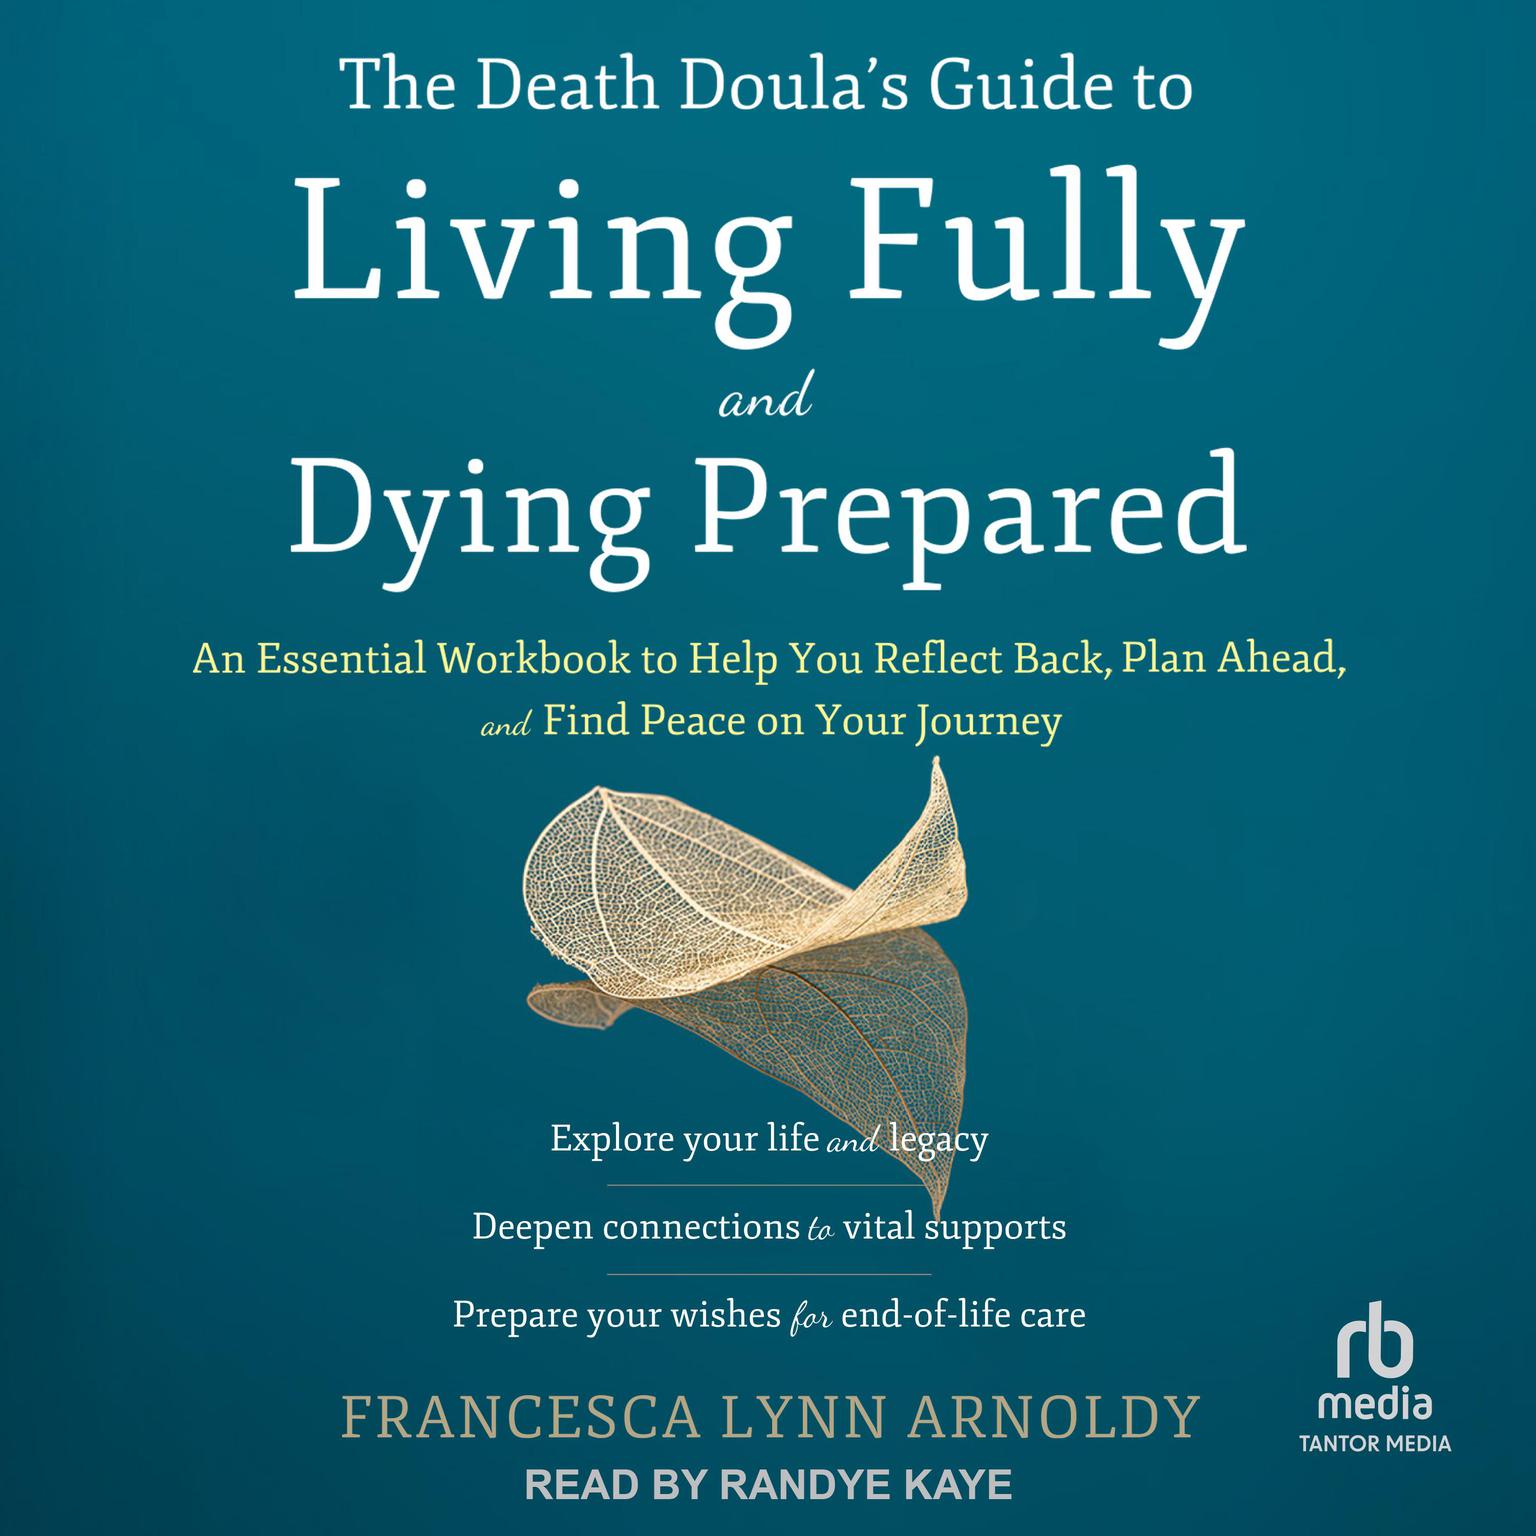 The Death Doulas Guide to Living Fully and Dying Prepared: An Essential Workbook to Help You Reflect Back, Plan Ahead, and Find Peace on Your Journey Audiobook, by Francesca Lynn Arnoldy